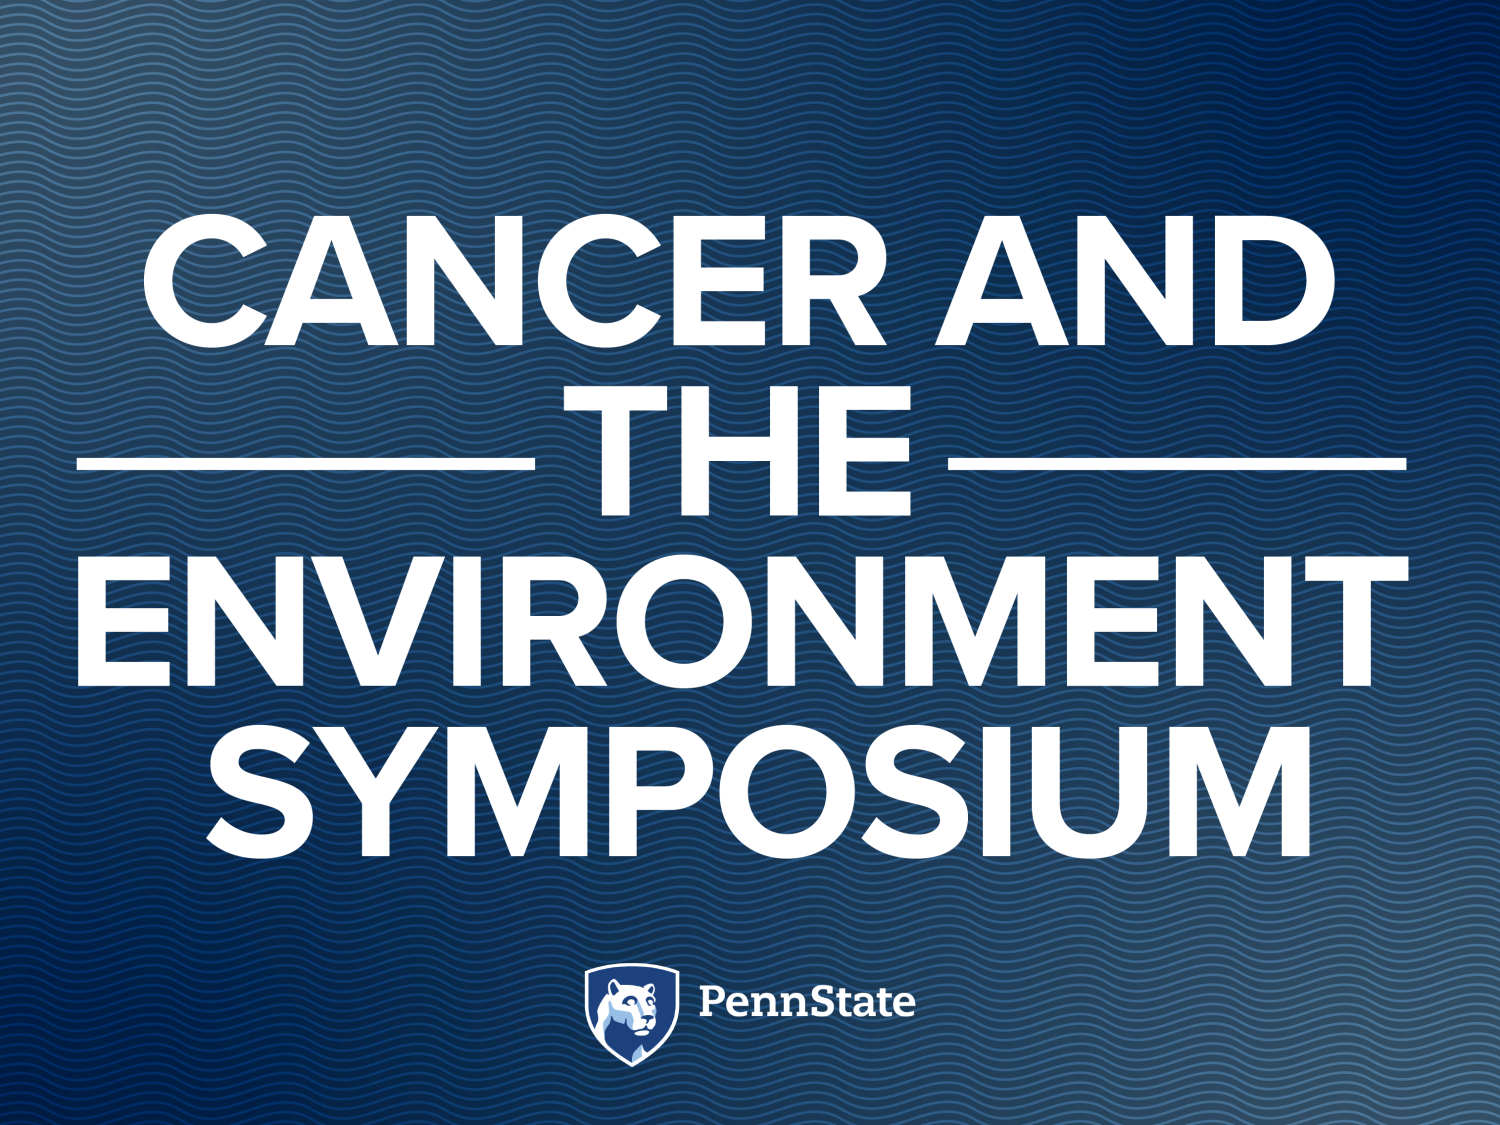 Cancer and the Environment Symposium